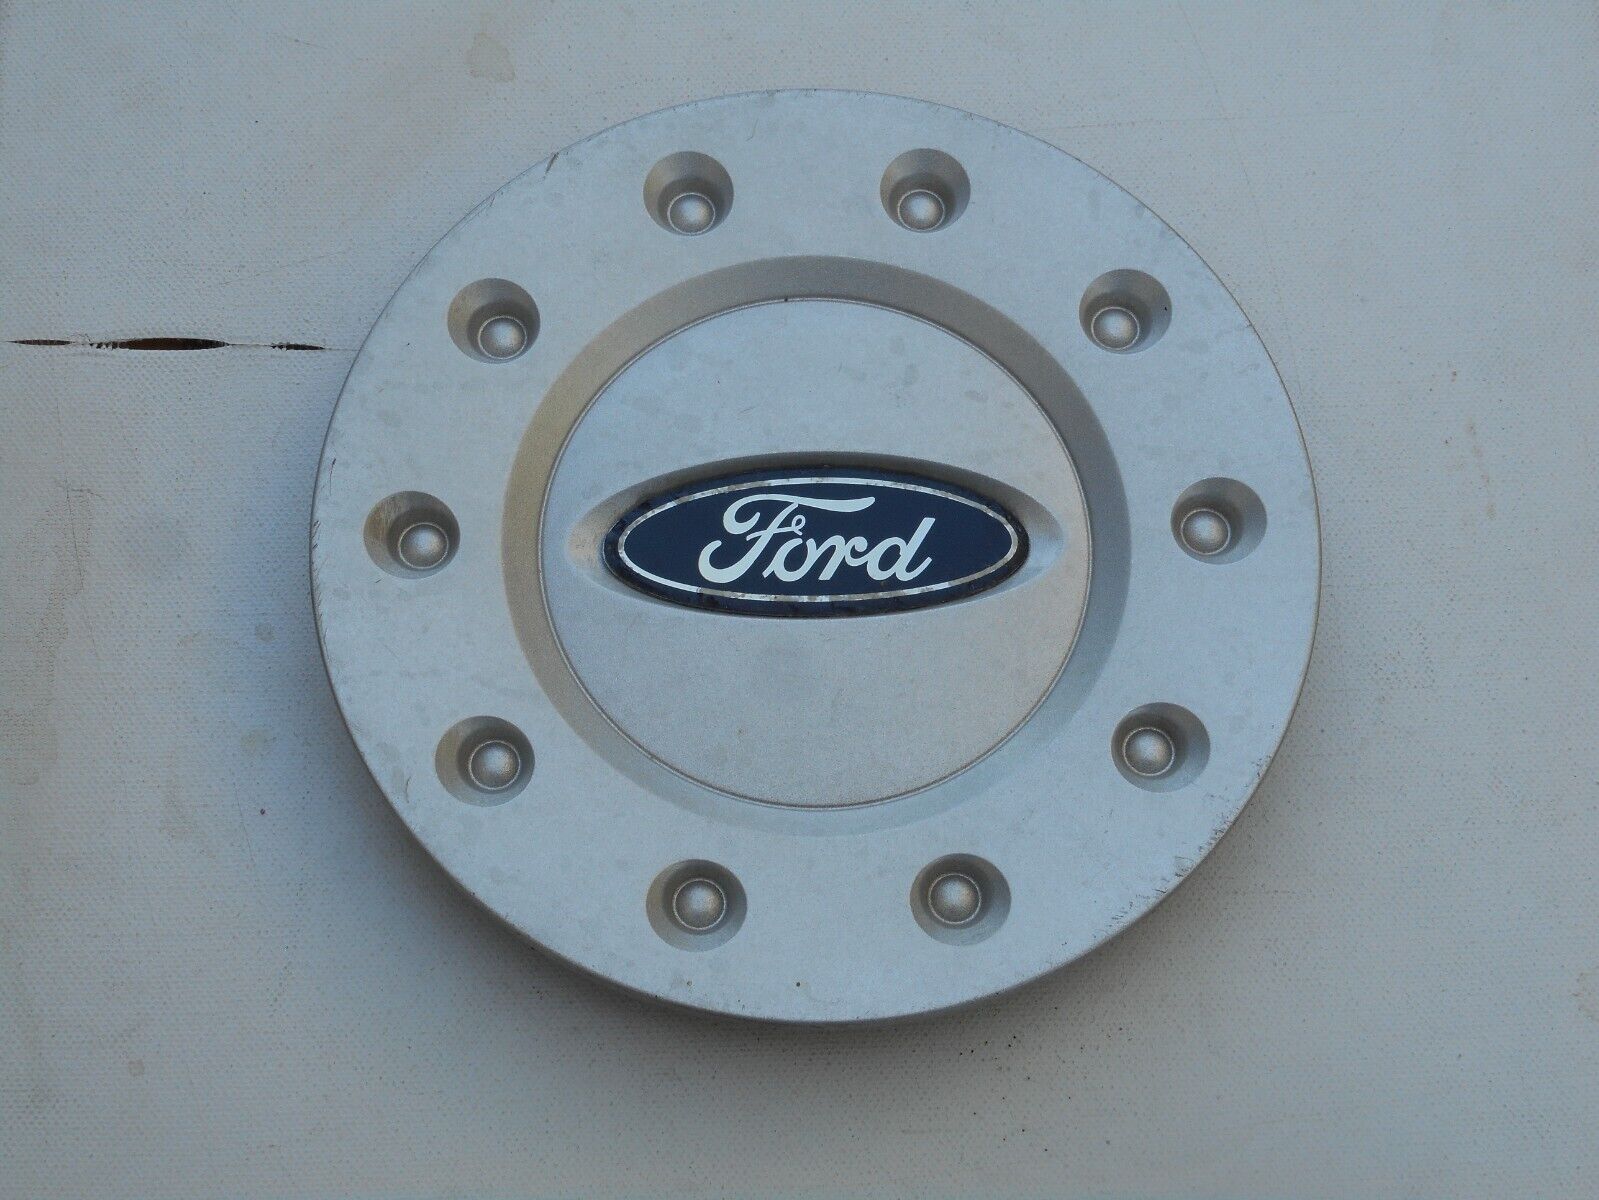 2005-2007 FORD 500 FREESTYLE WHEEL CENTER CAP OEM 4F93-1A096-AA